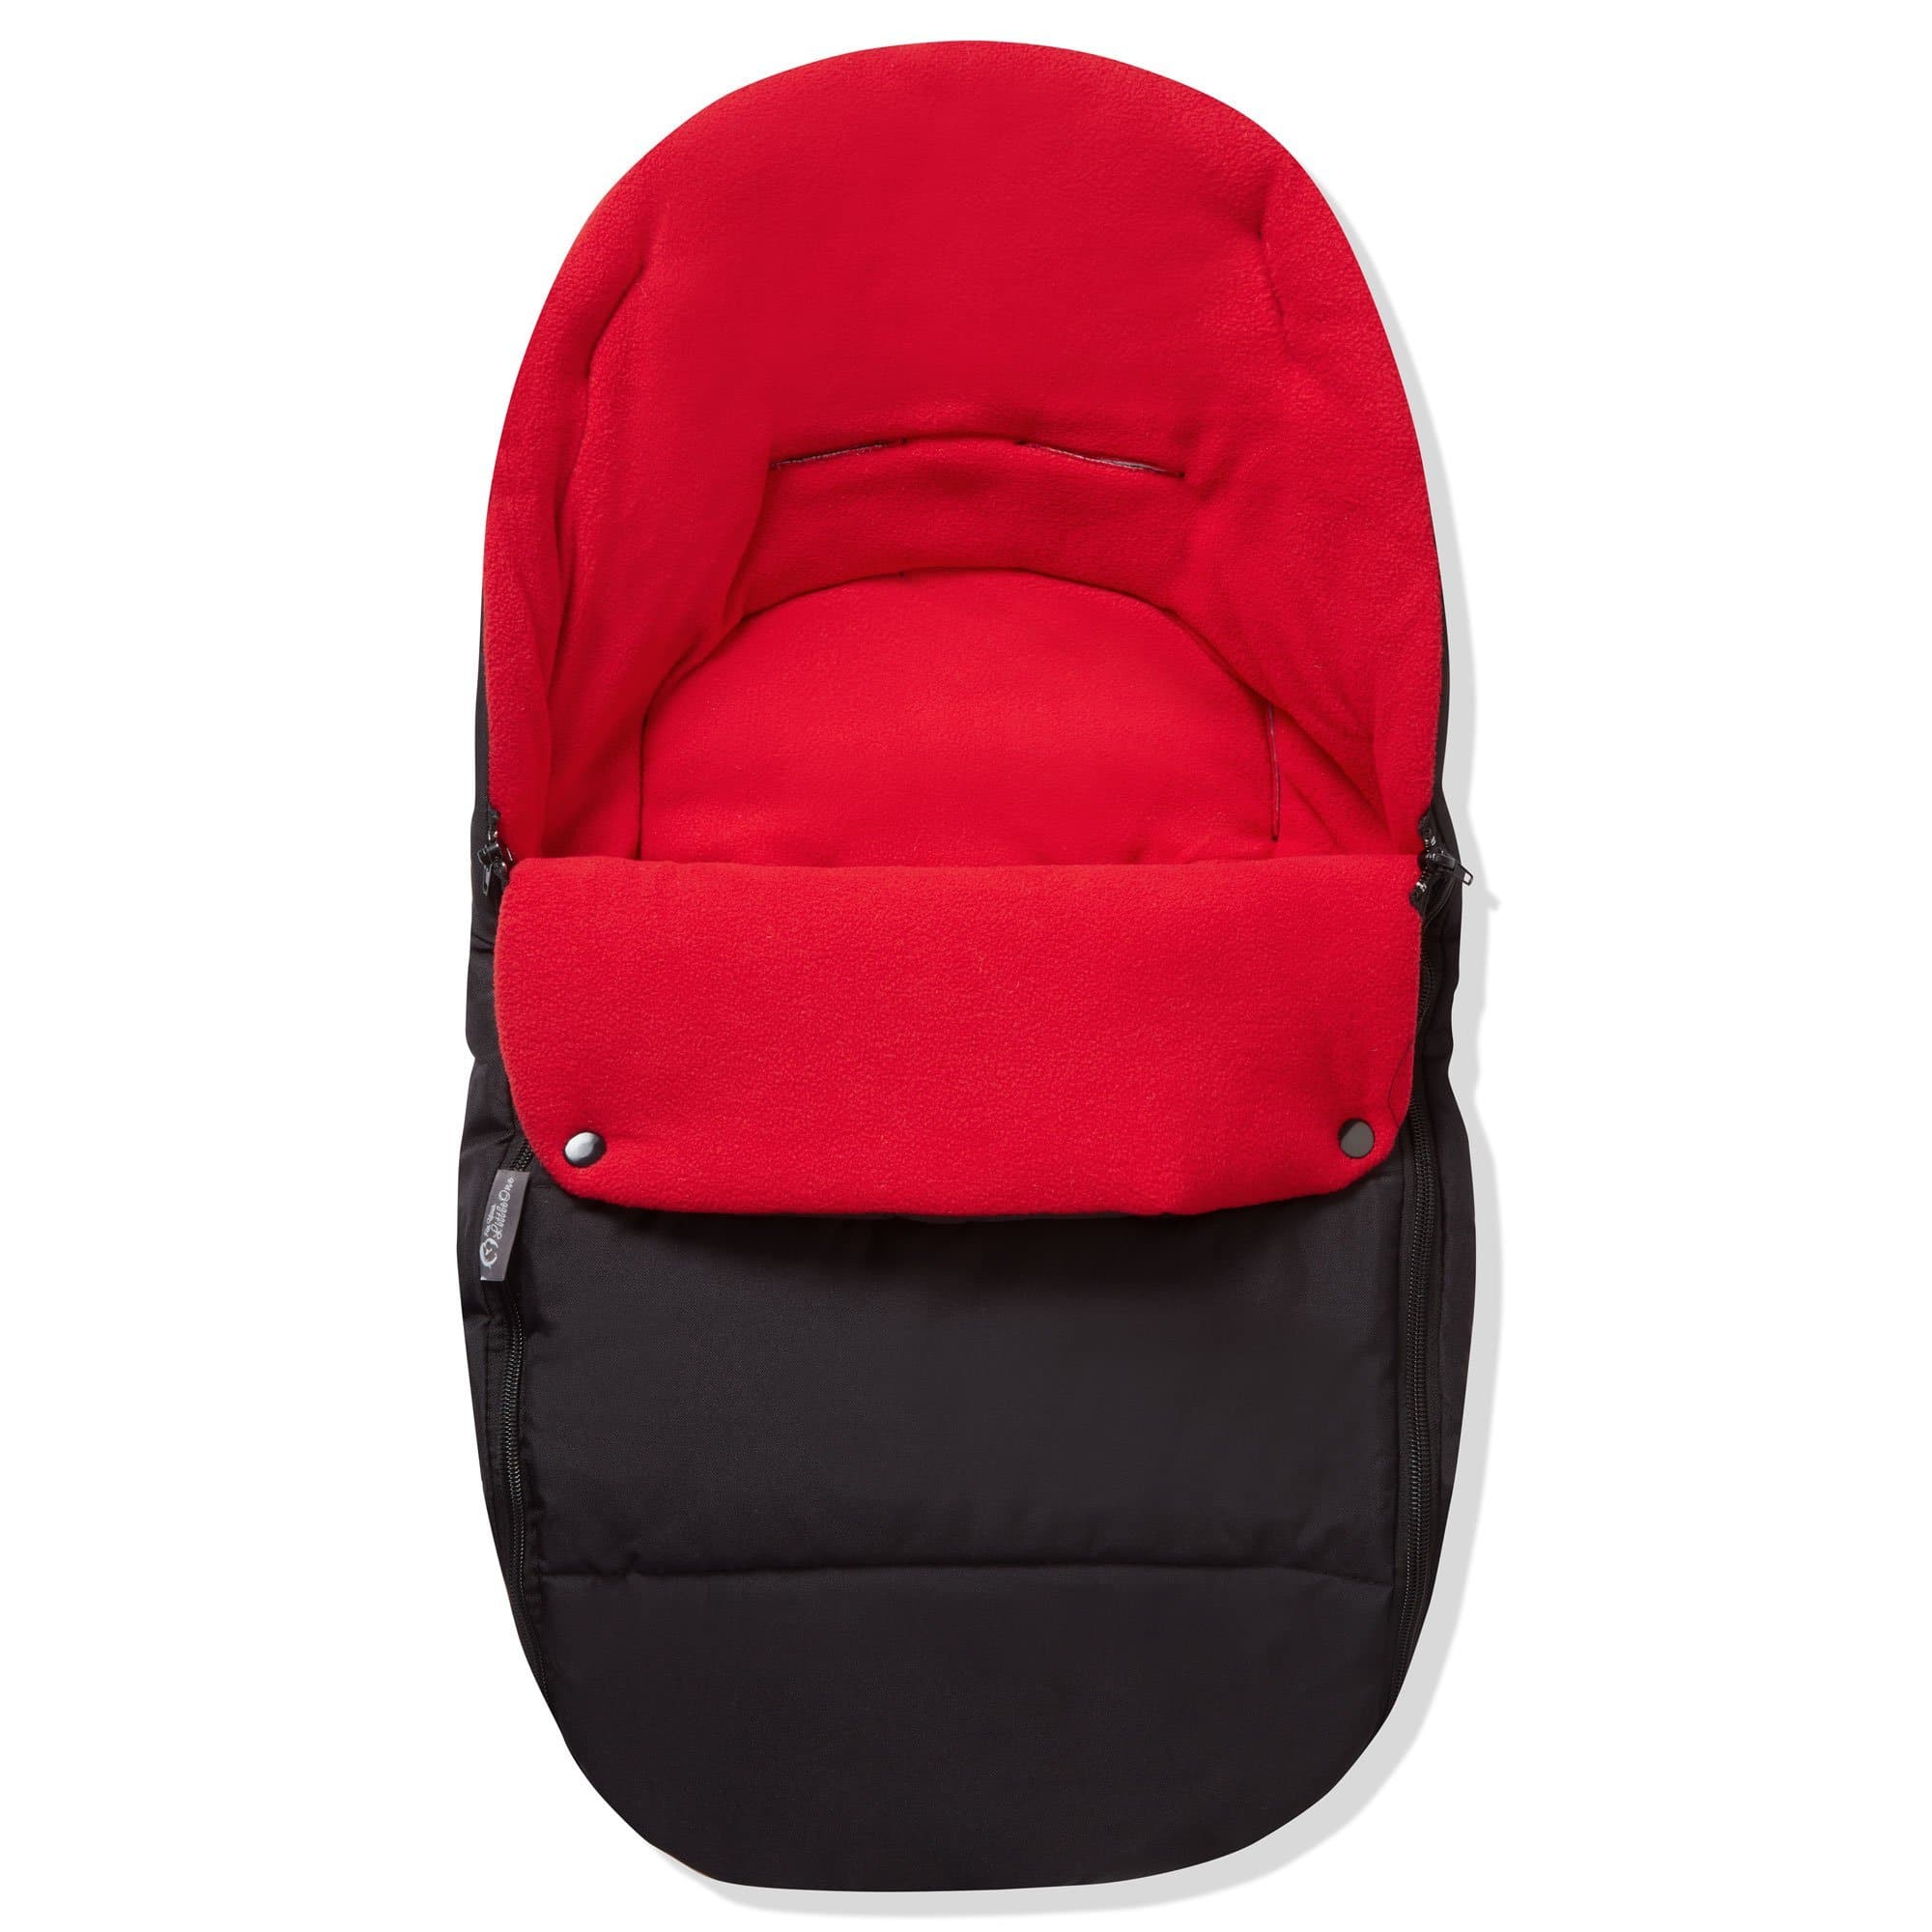 Premium Car Seat Footmuff / Cosy Toes Compatible with Cybex - Fire Red / Fits All Models | For Your Little One